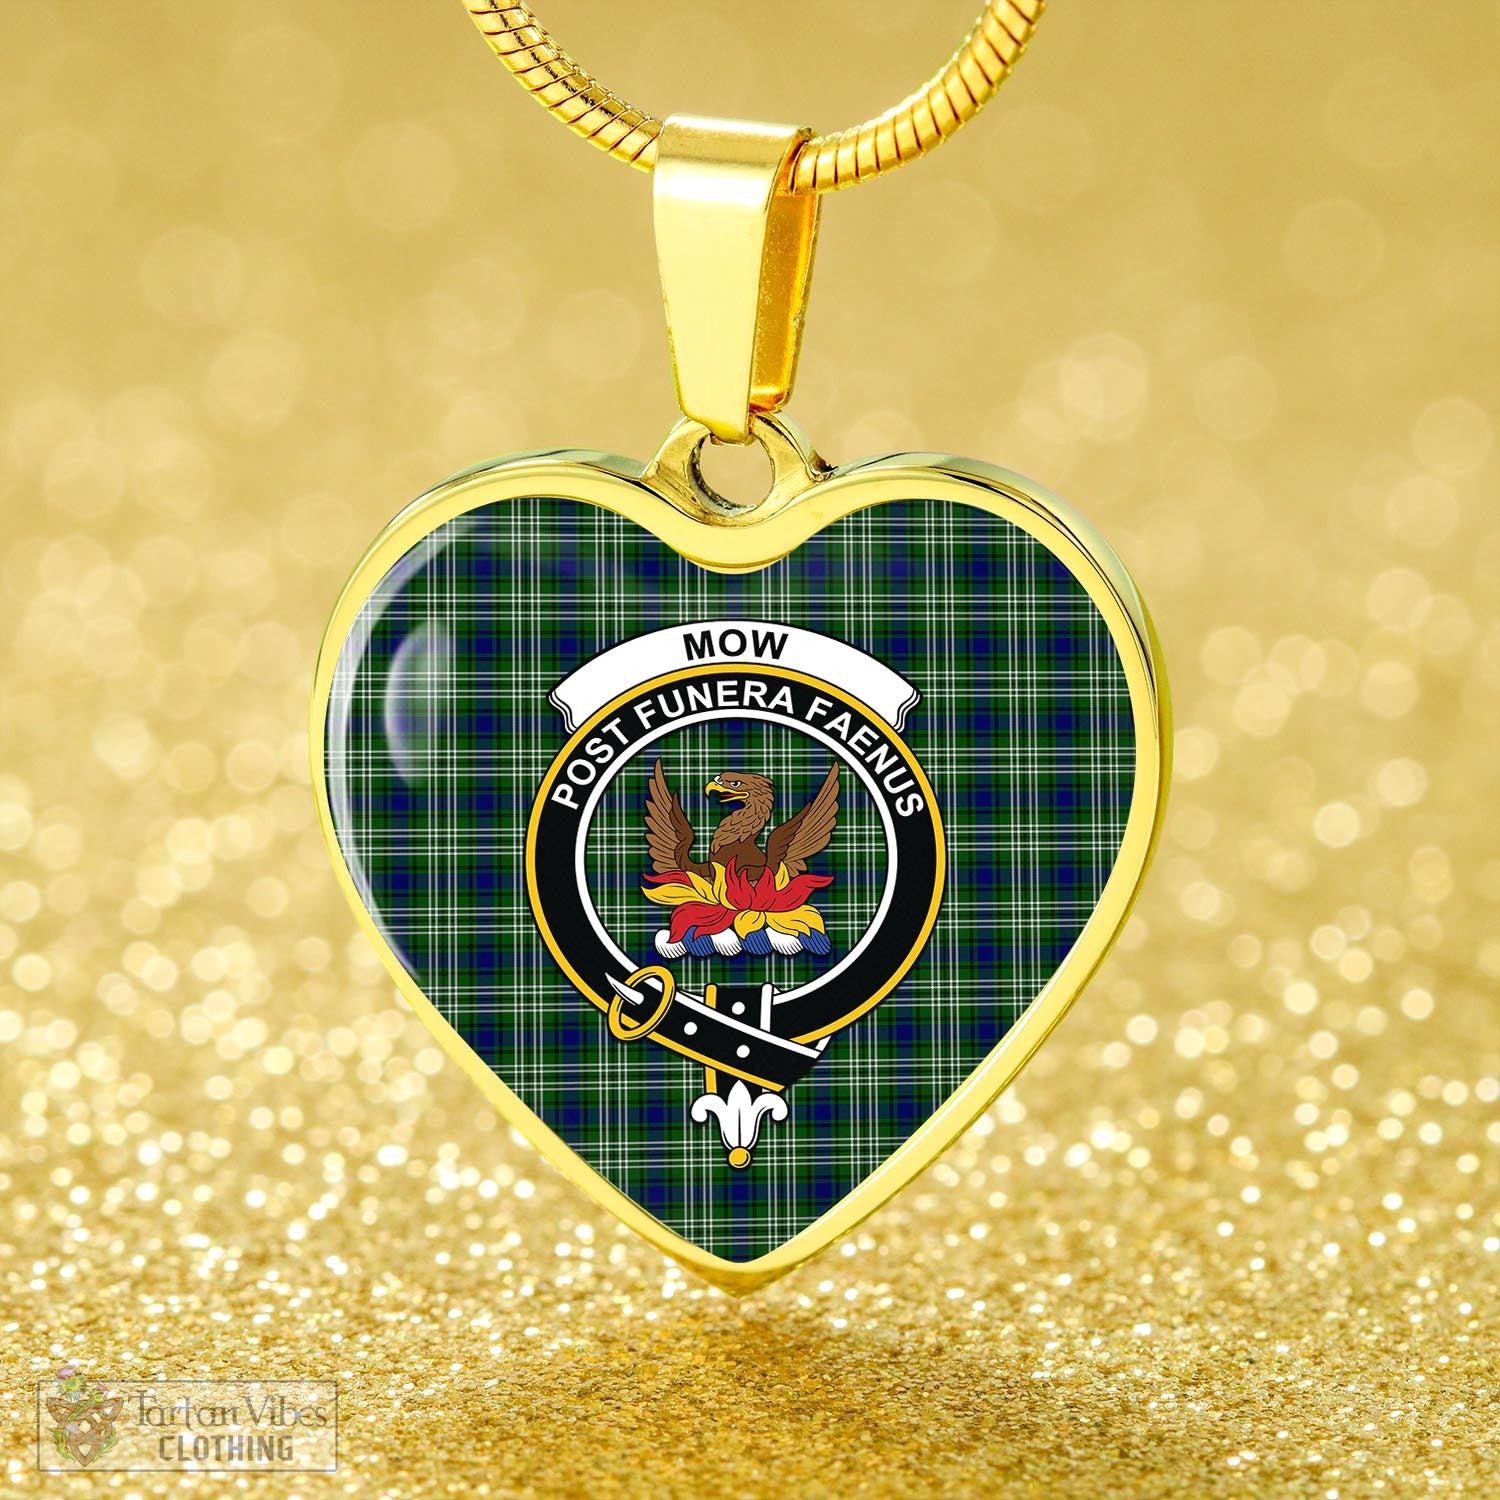 Tartan Vibes Clothing Mow Tartan Heart Necklace with Family Crest